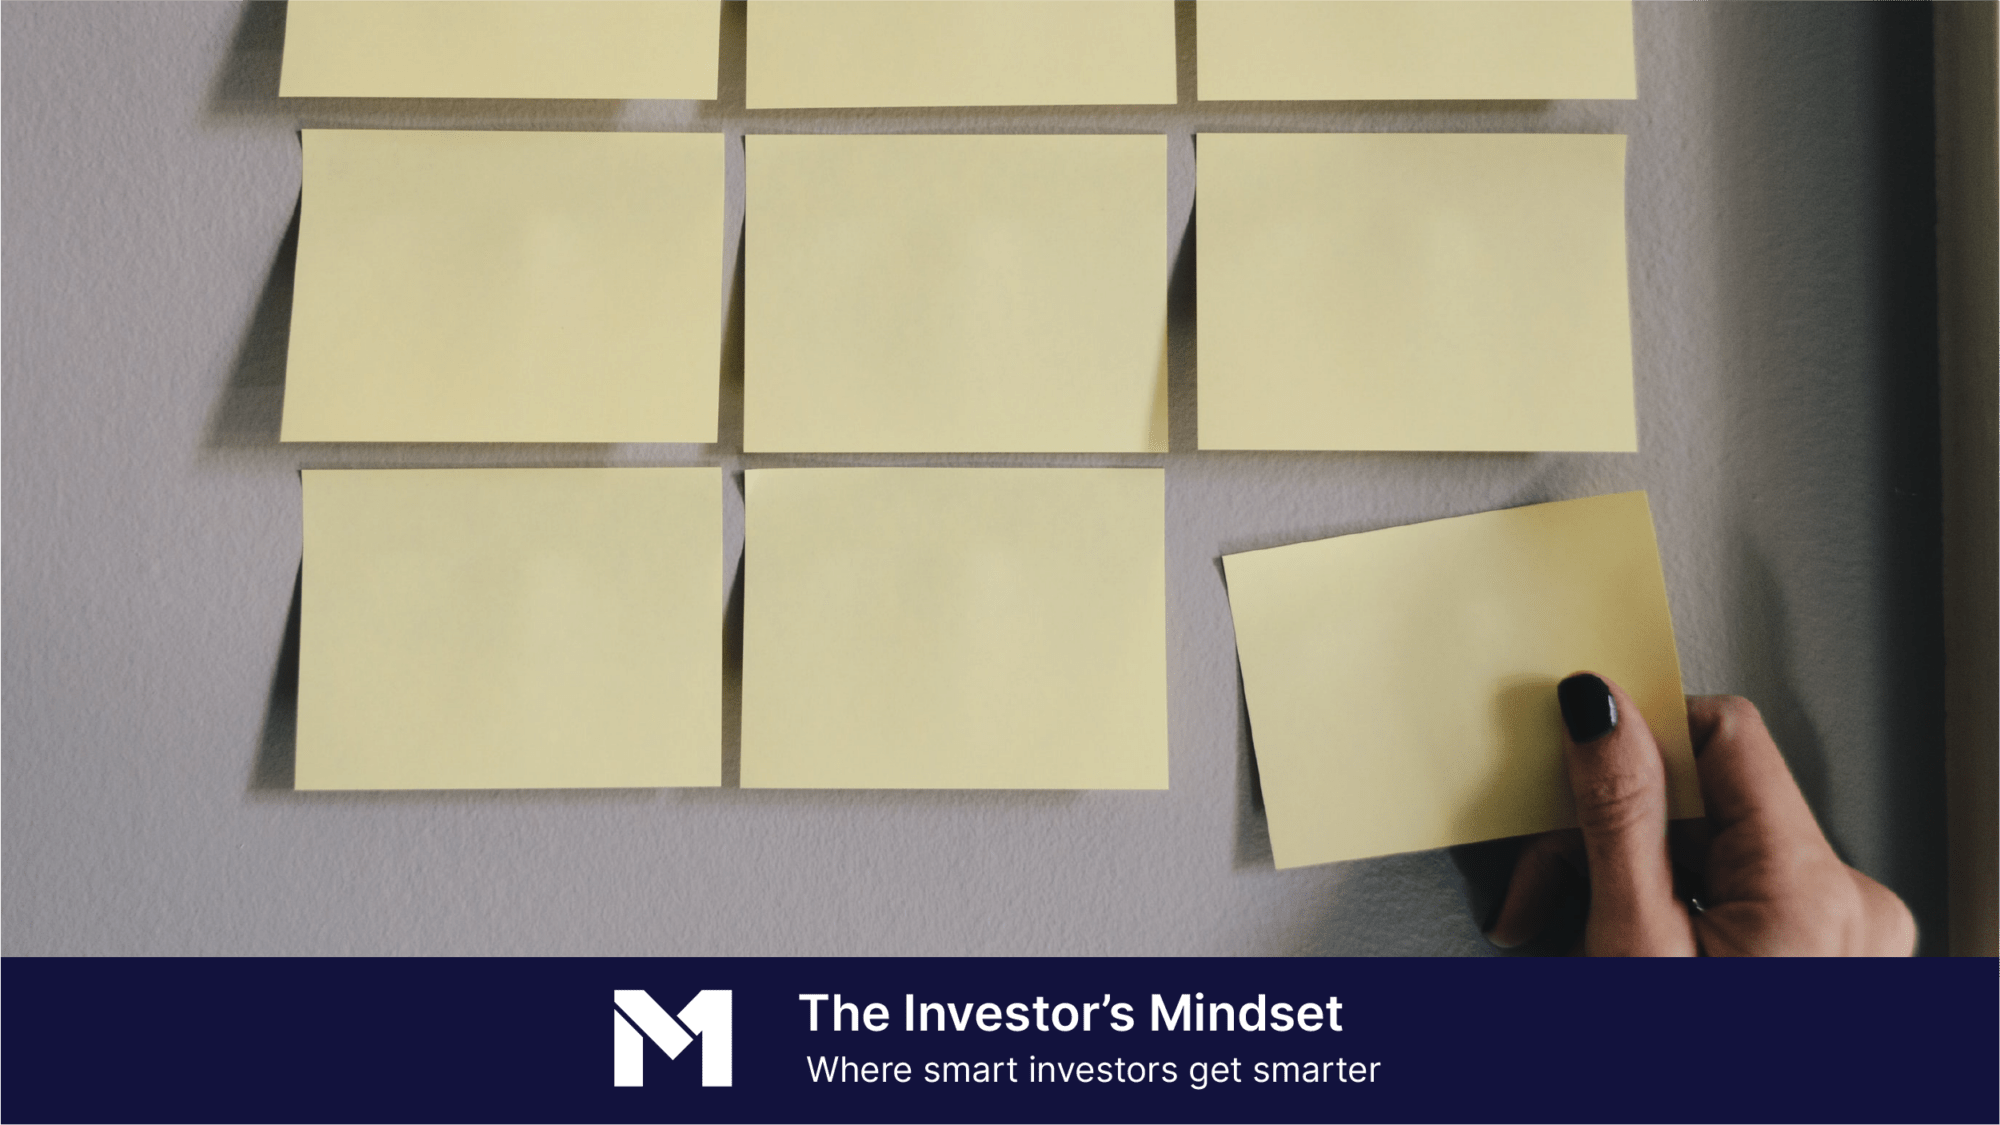 Visualizing stock splits through a grid of post-it notes, with a banner "The Investor's Mindset, where smart investors get smarter."